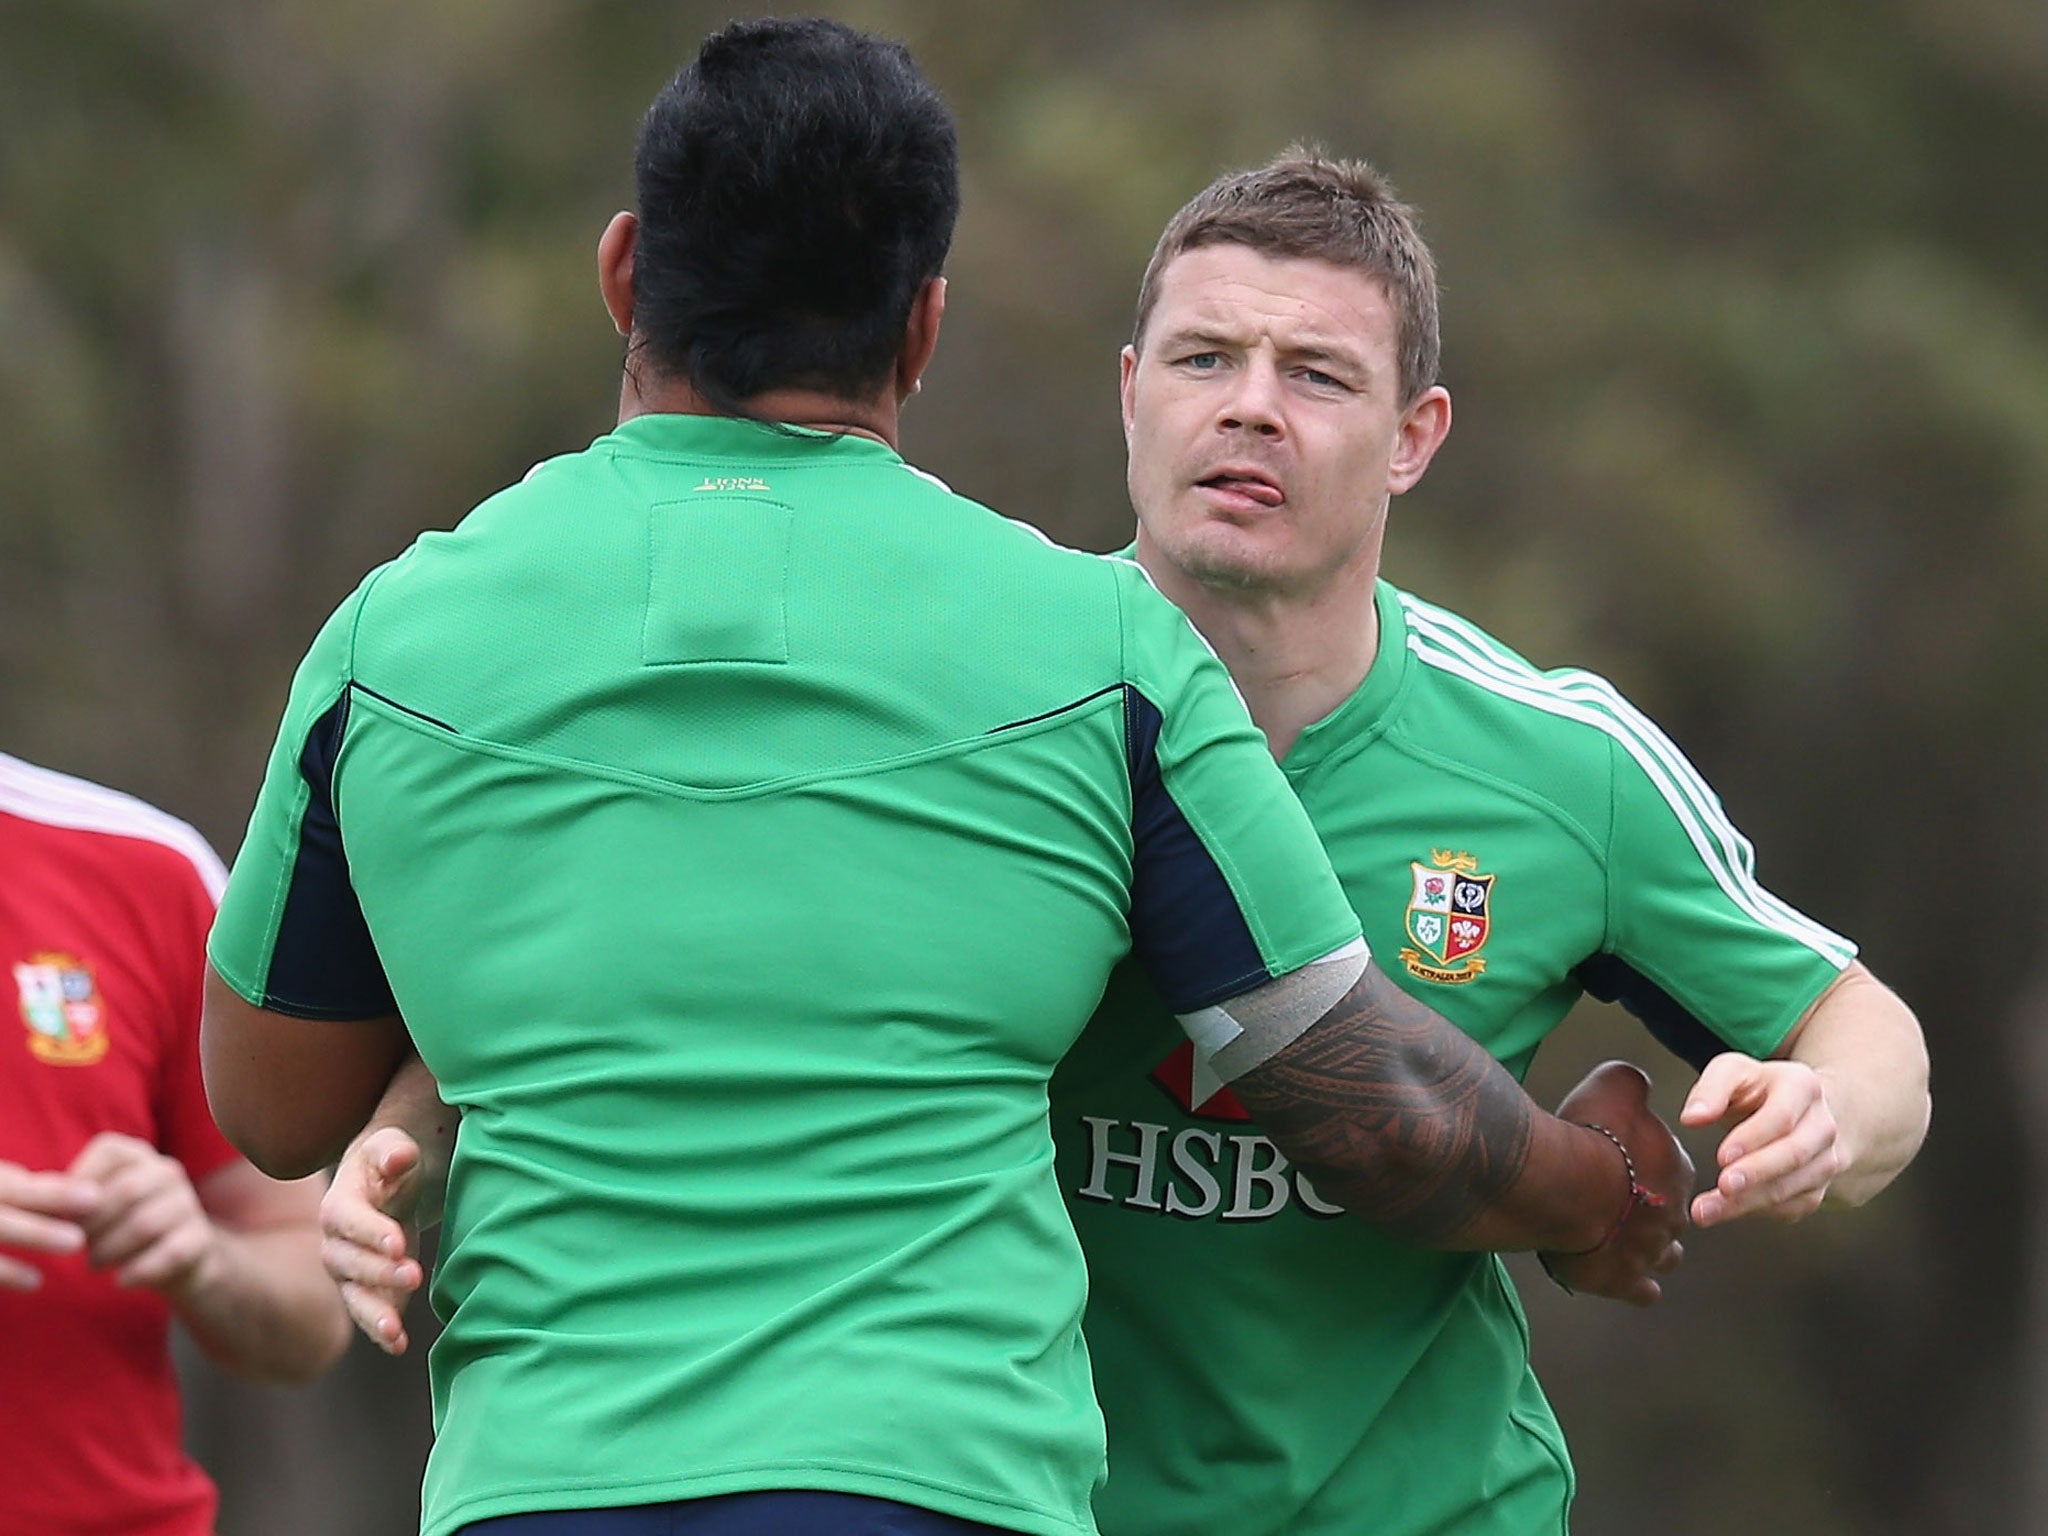 Disappointment: Brian O'Driscoll was widely expected to captain the Lions for the deciding Test